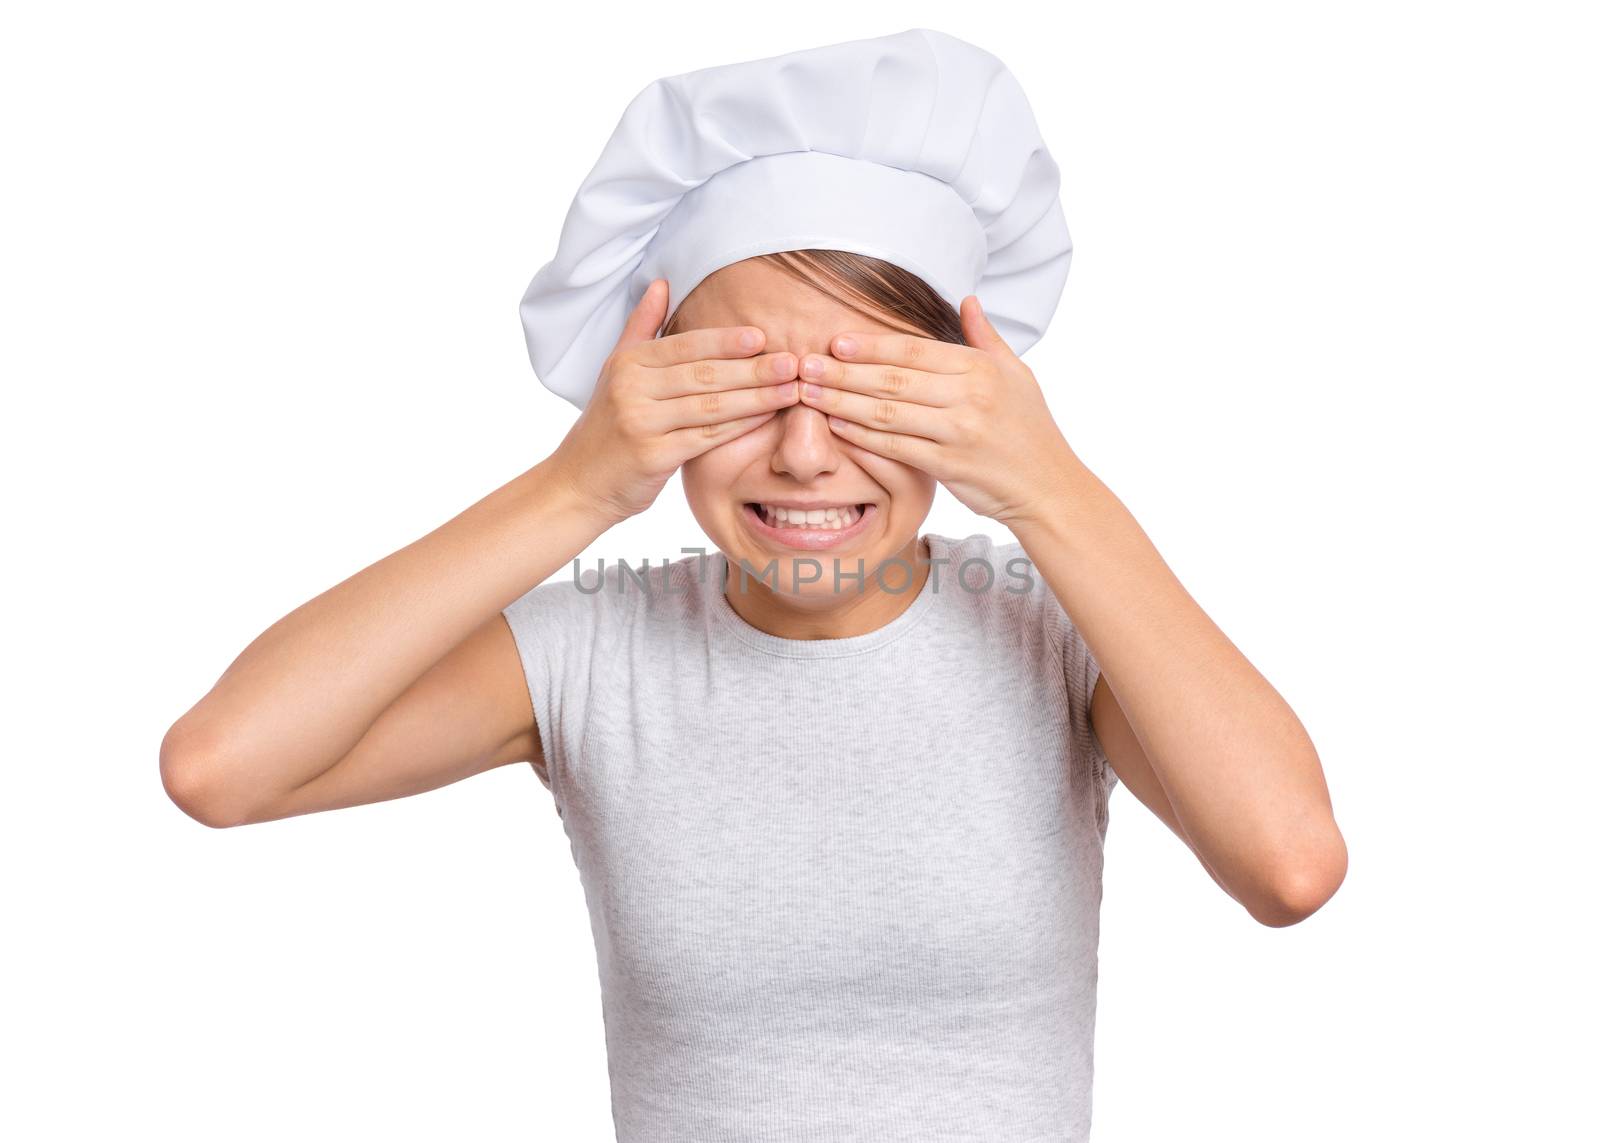 Cute girl in chef hat isolated on white background covering eyes with hands